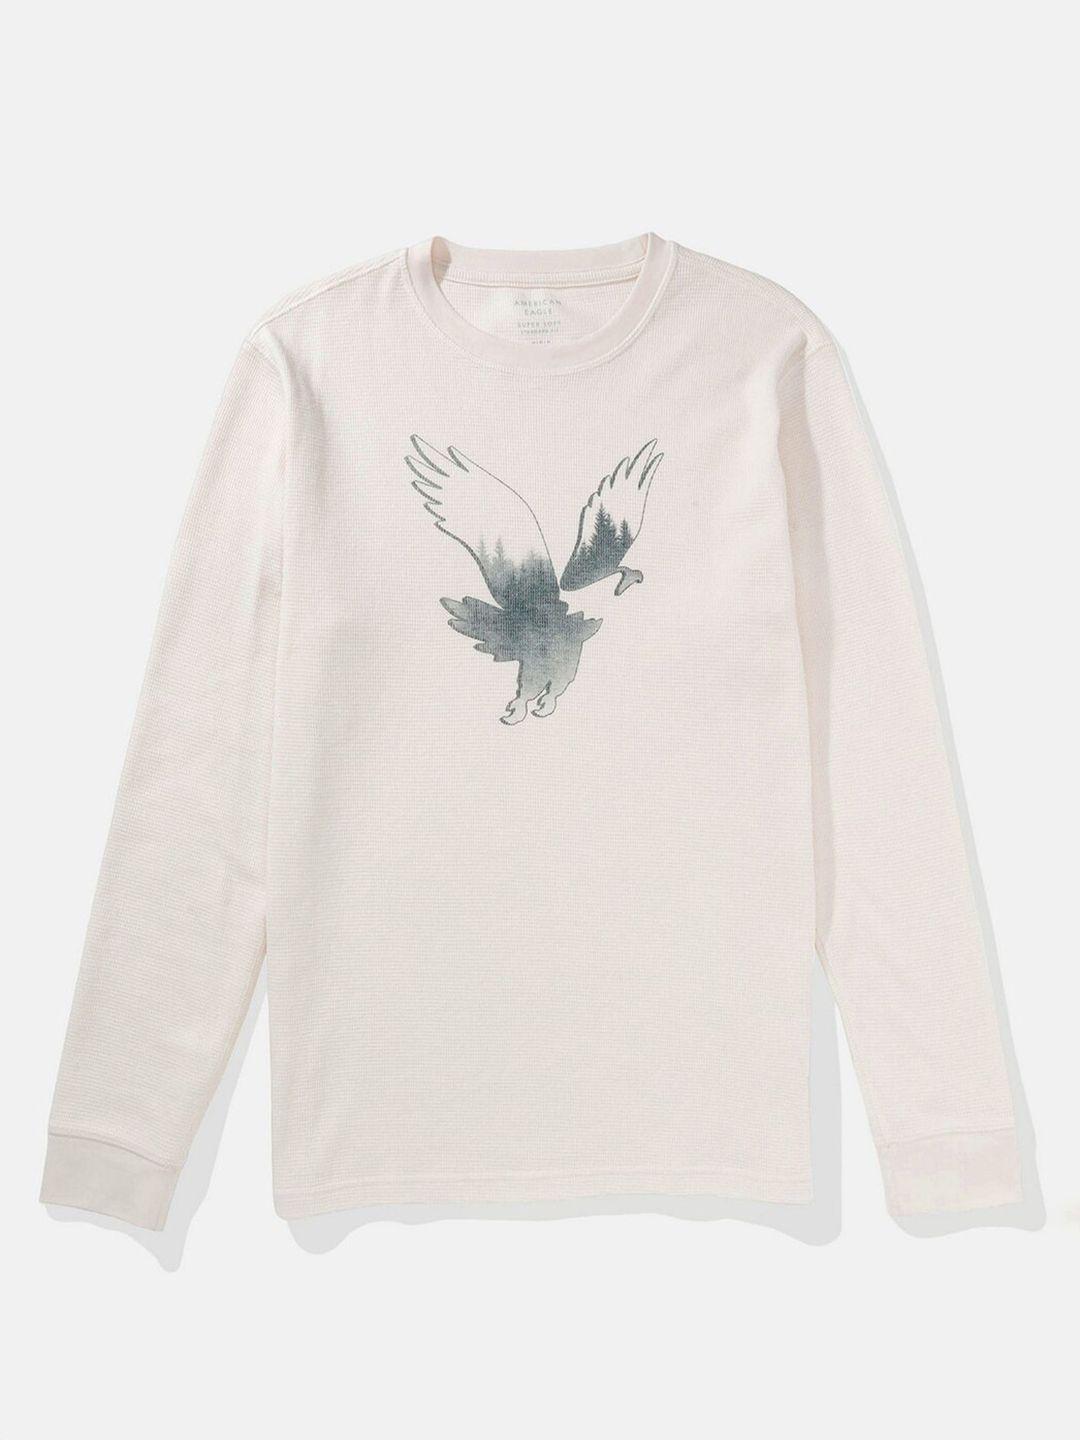 american-eagle-outfitters-graphic-printed-round-neck-cotton-tshirt